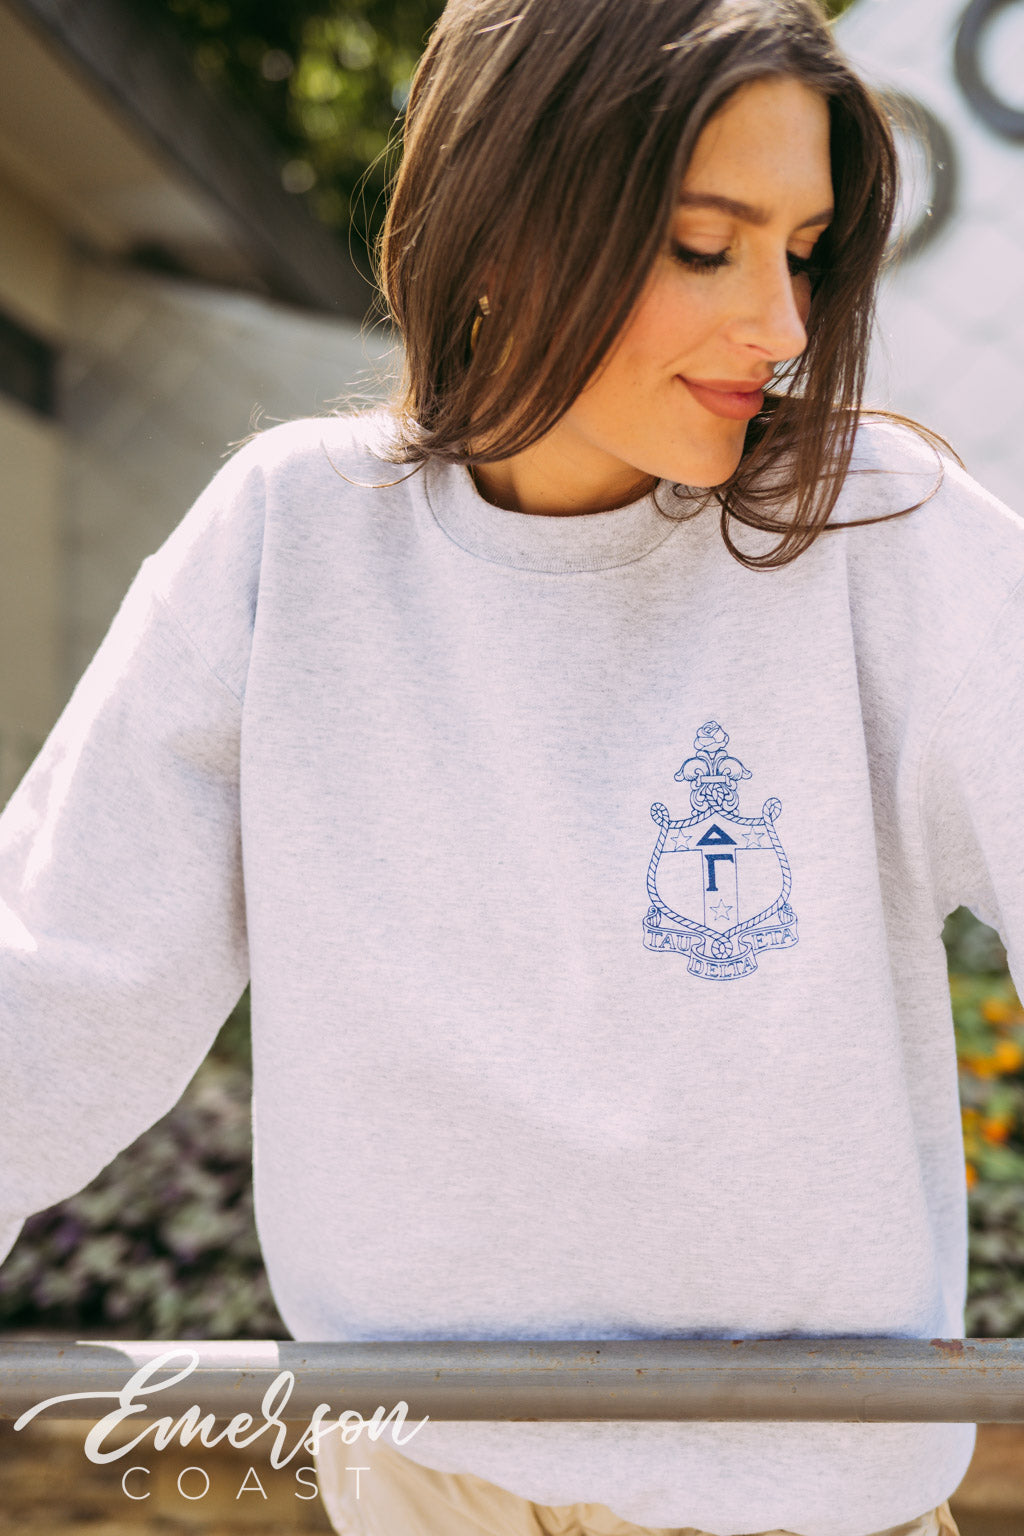 Delta Gamma All the Things Crewneck